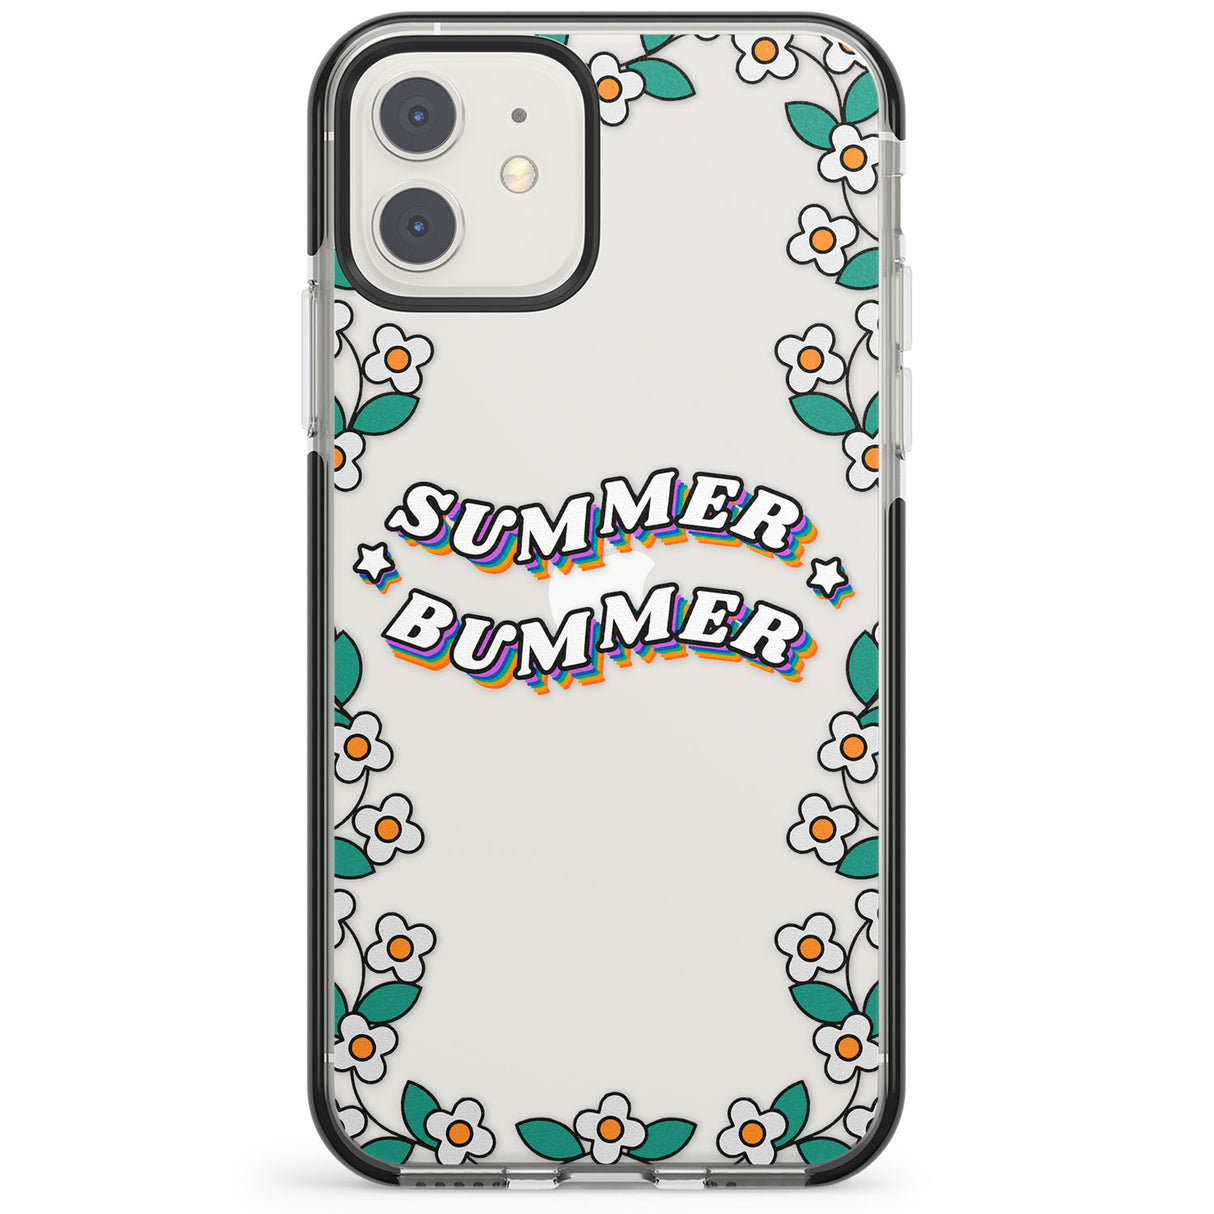 Summer Bummer Impact Phone Case for iPhone 11, iphone 12